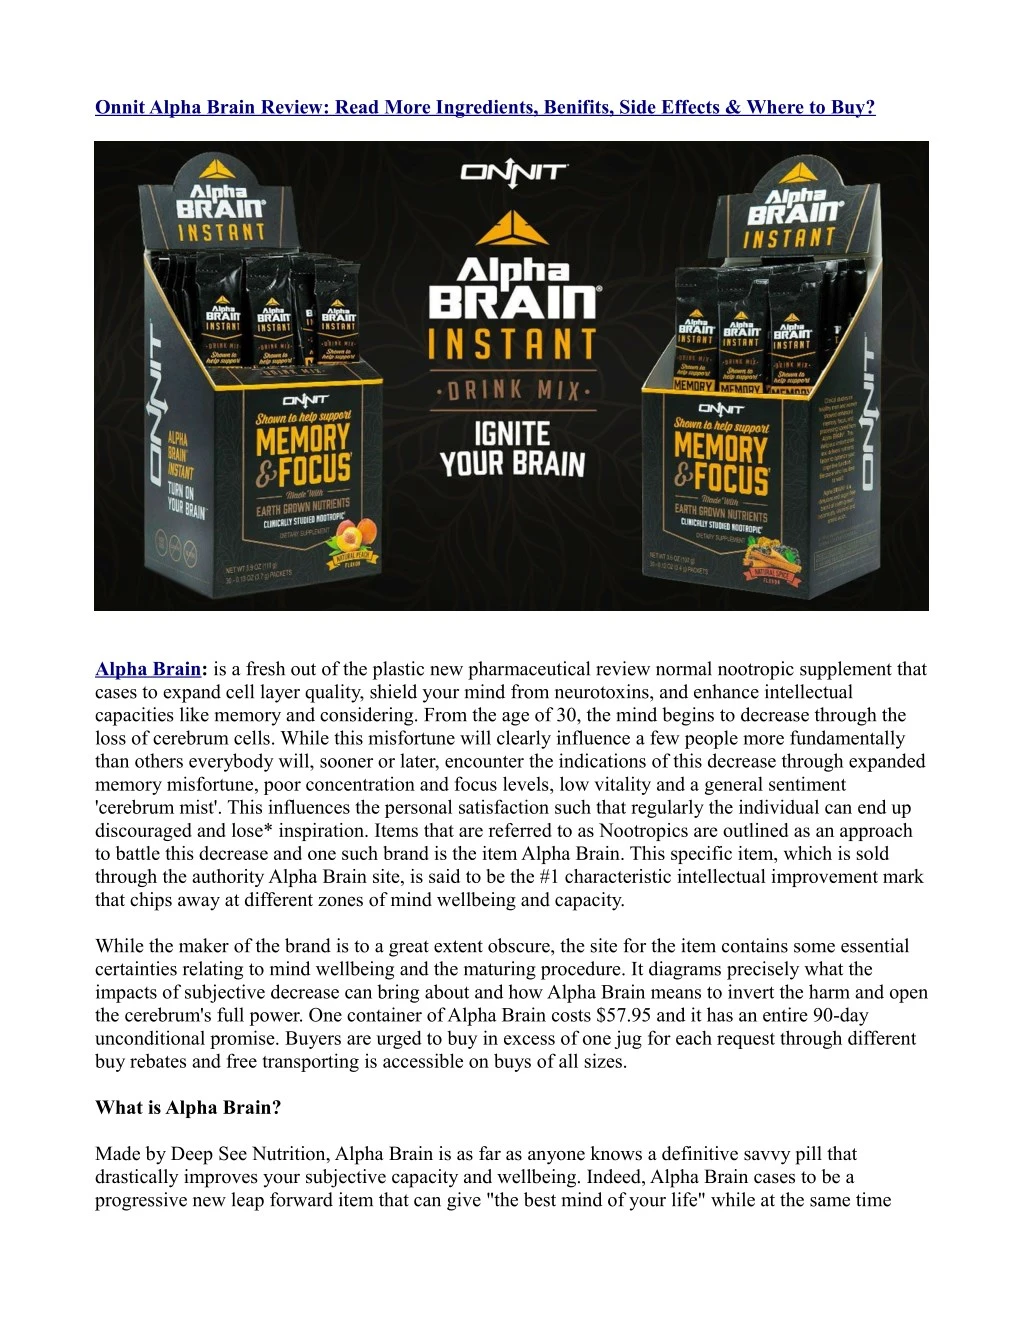 onnit alpha brain review read more ingredients